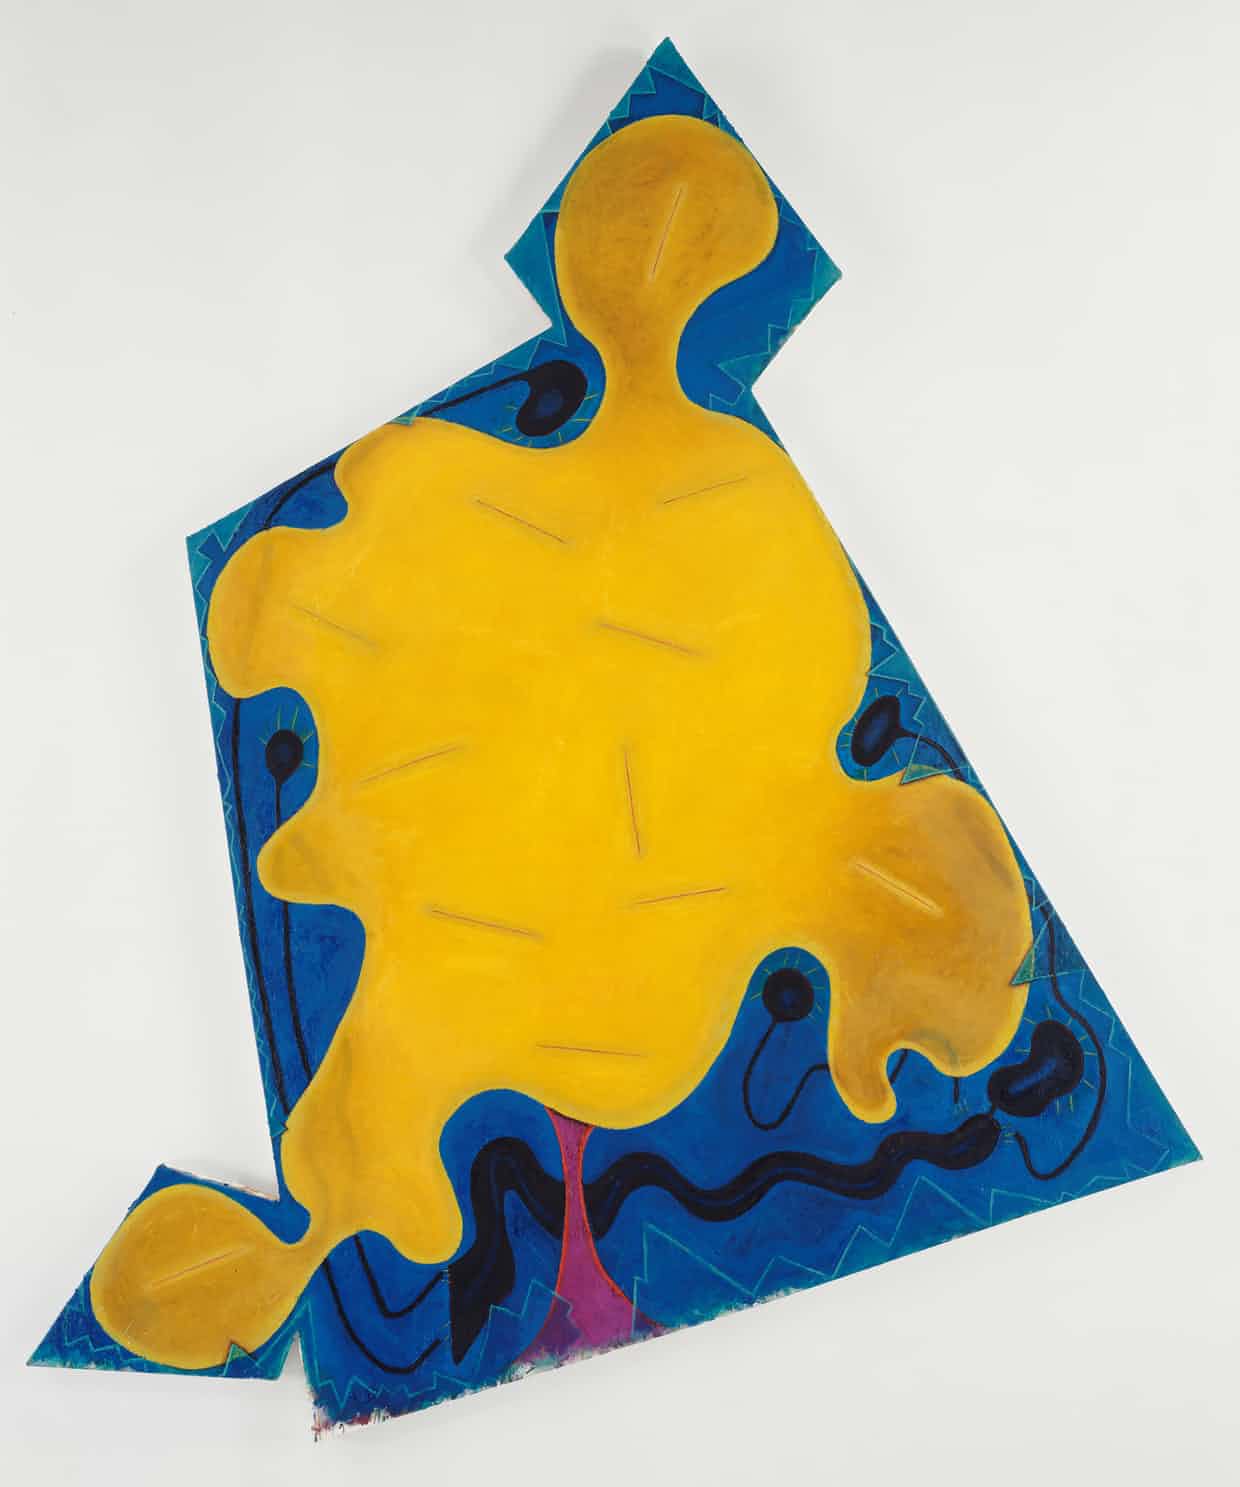 An abstract painting of a geometrical blue form with a yellow organic form painted on it.The flowy lines of the yellow shape stand in contrast to the sharp lines of the blue form surrounding it.